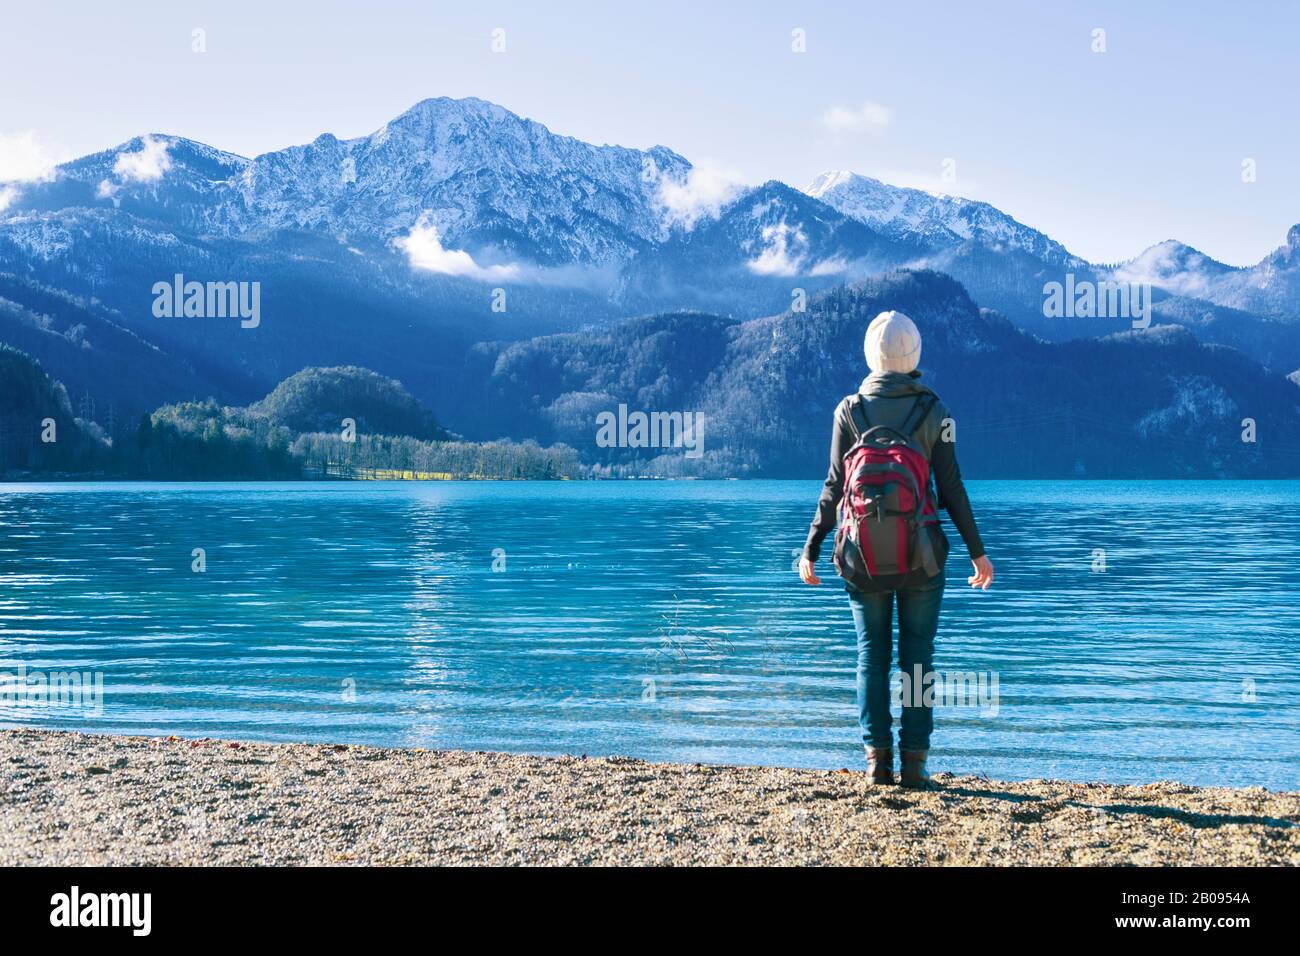 The girl relaxes near the lake and mountains. Stock Photo